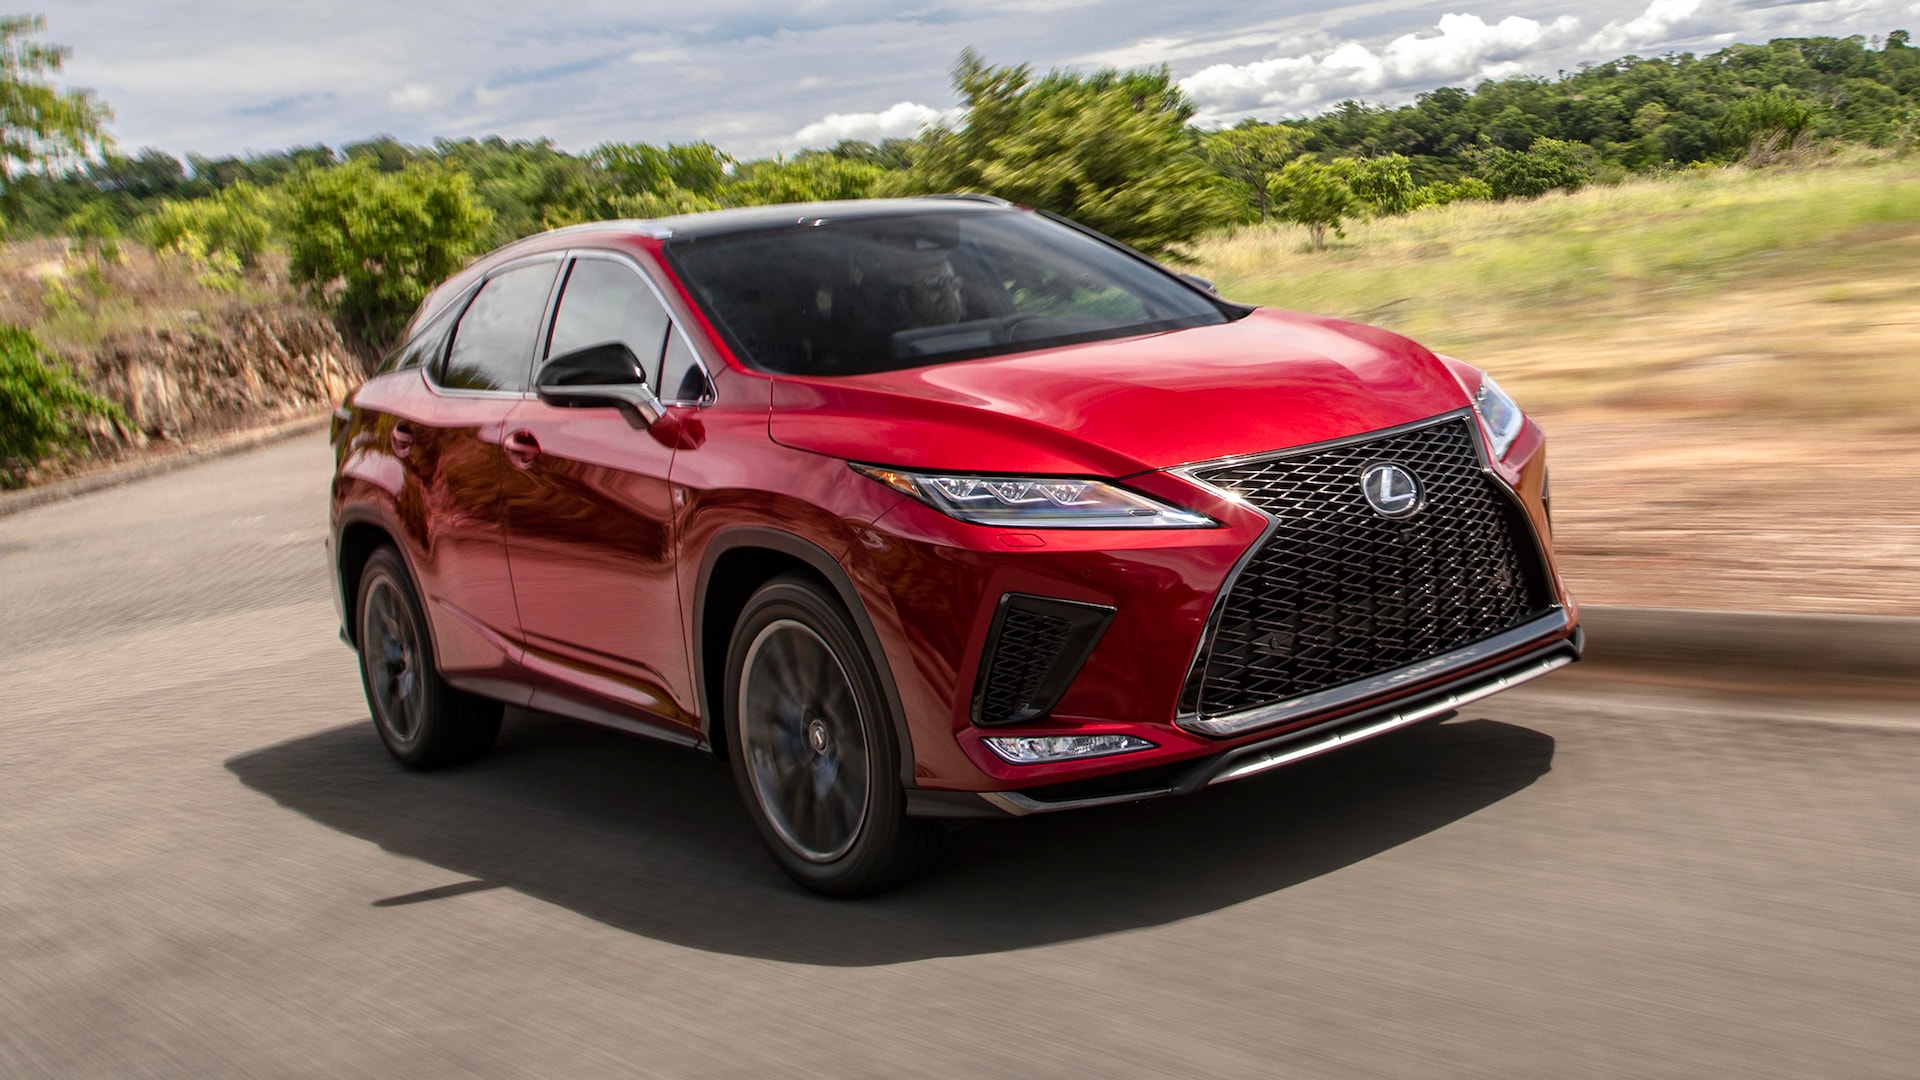 2020 Lexus RX First Drive: Blink and You'll Miss It